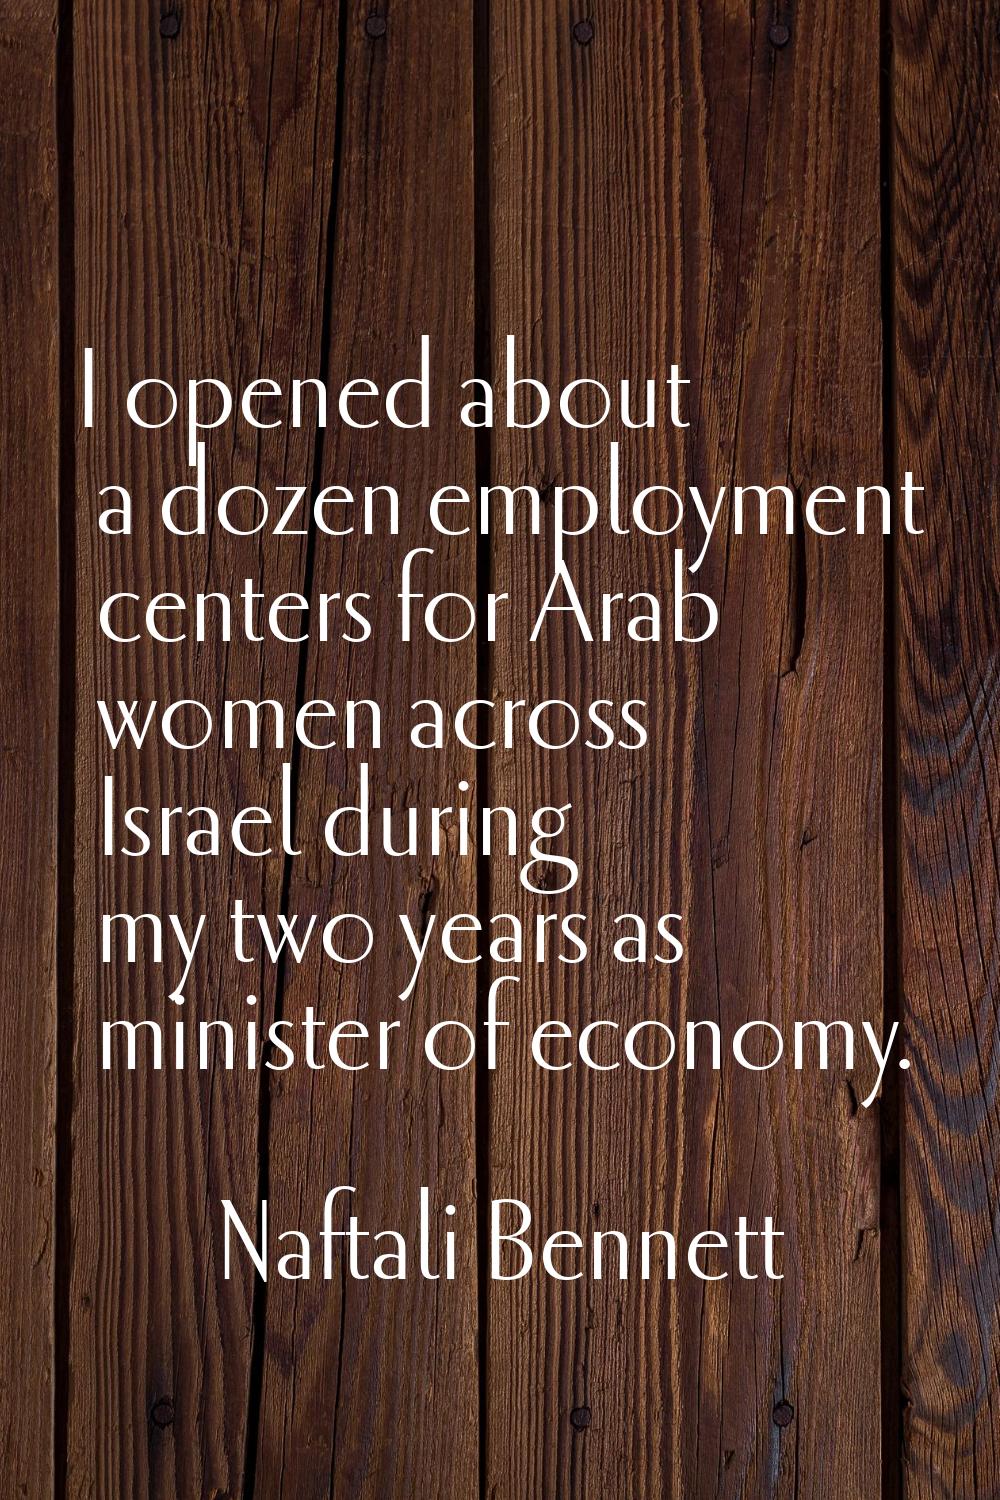 I opened about a dozen employment centers for Arab women across Israel during my two years as minis